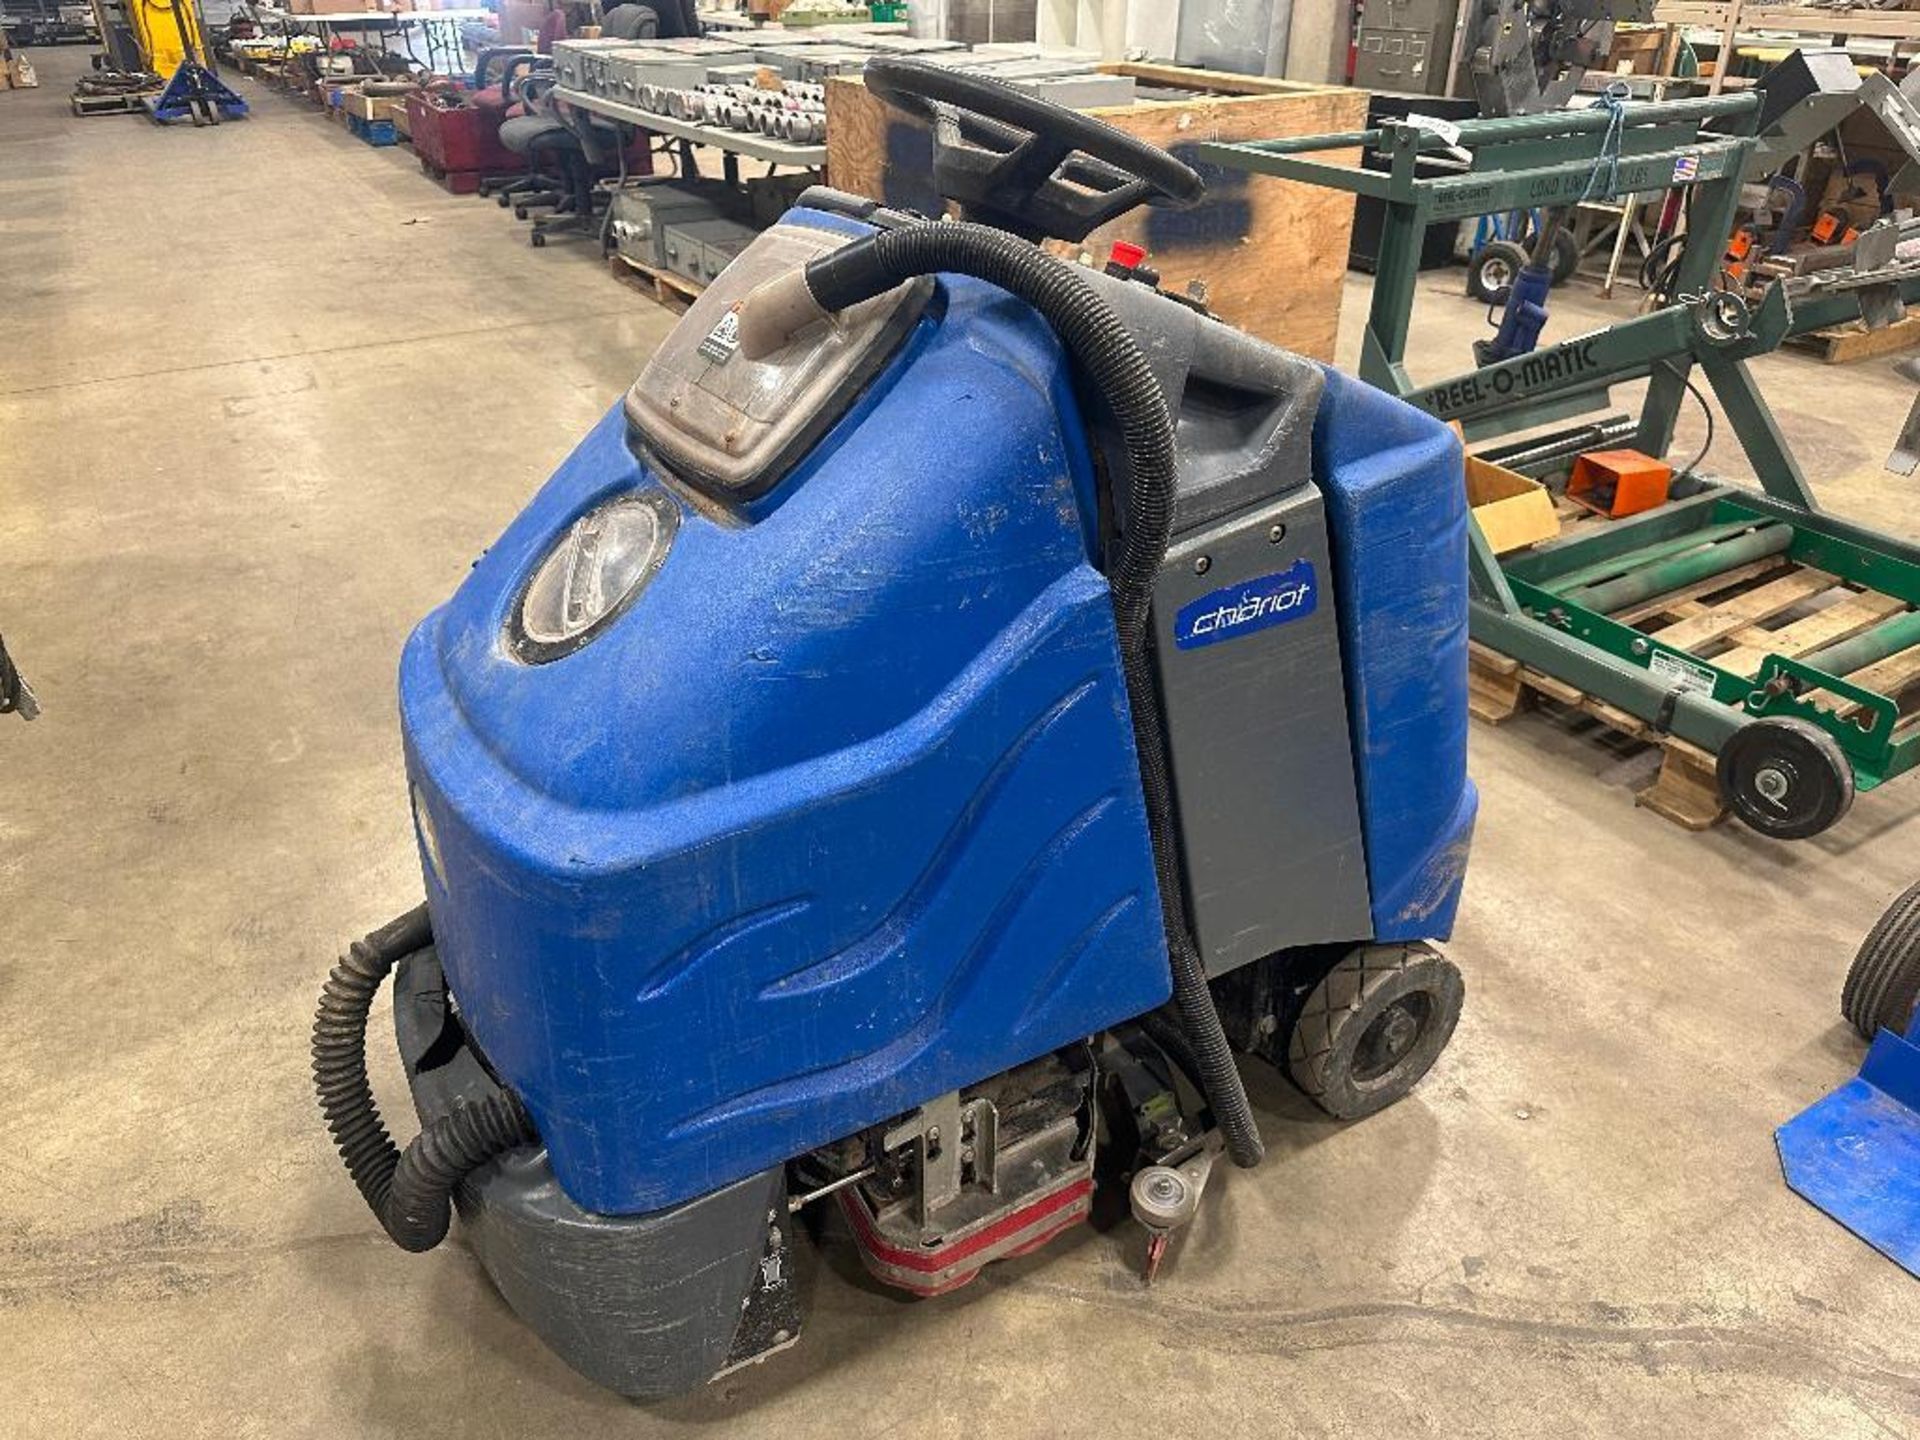 Chariot Commercial Floor Sweeper w. 1654 hours showing